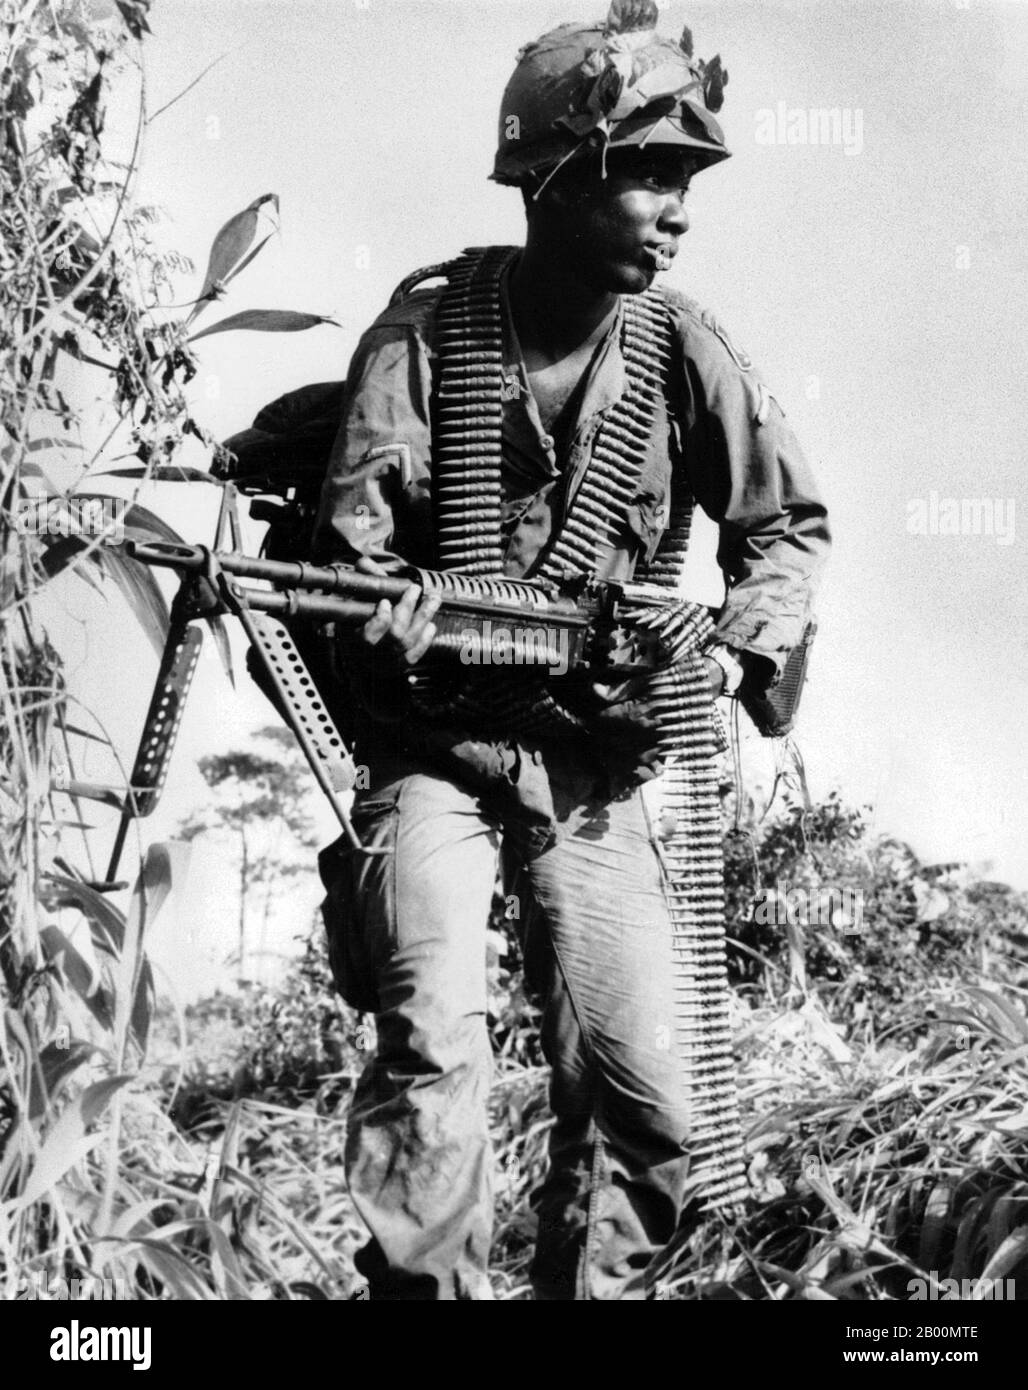 Vietnam: African-American soldier on patrol, c. 1966.  The Second Indochina War, known in America as the Vietnam War, was a Cold War era military conflict that occurred in Vietnam, Laos, and Cambodia from 1 November 1955 to the fall of Saigon on 30 April 1975. This war followed the First Indochina War and was fought between North Vietnam, supported by its communist allies, and the government of South Vietnam, supported by the U.S. and other anti-communist nations. The U.S. government viewed involvement in the war as a way to prevent a communist takeover of South Vietnam. Stock Photo